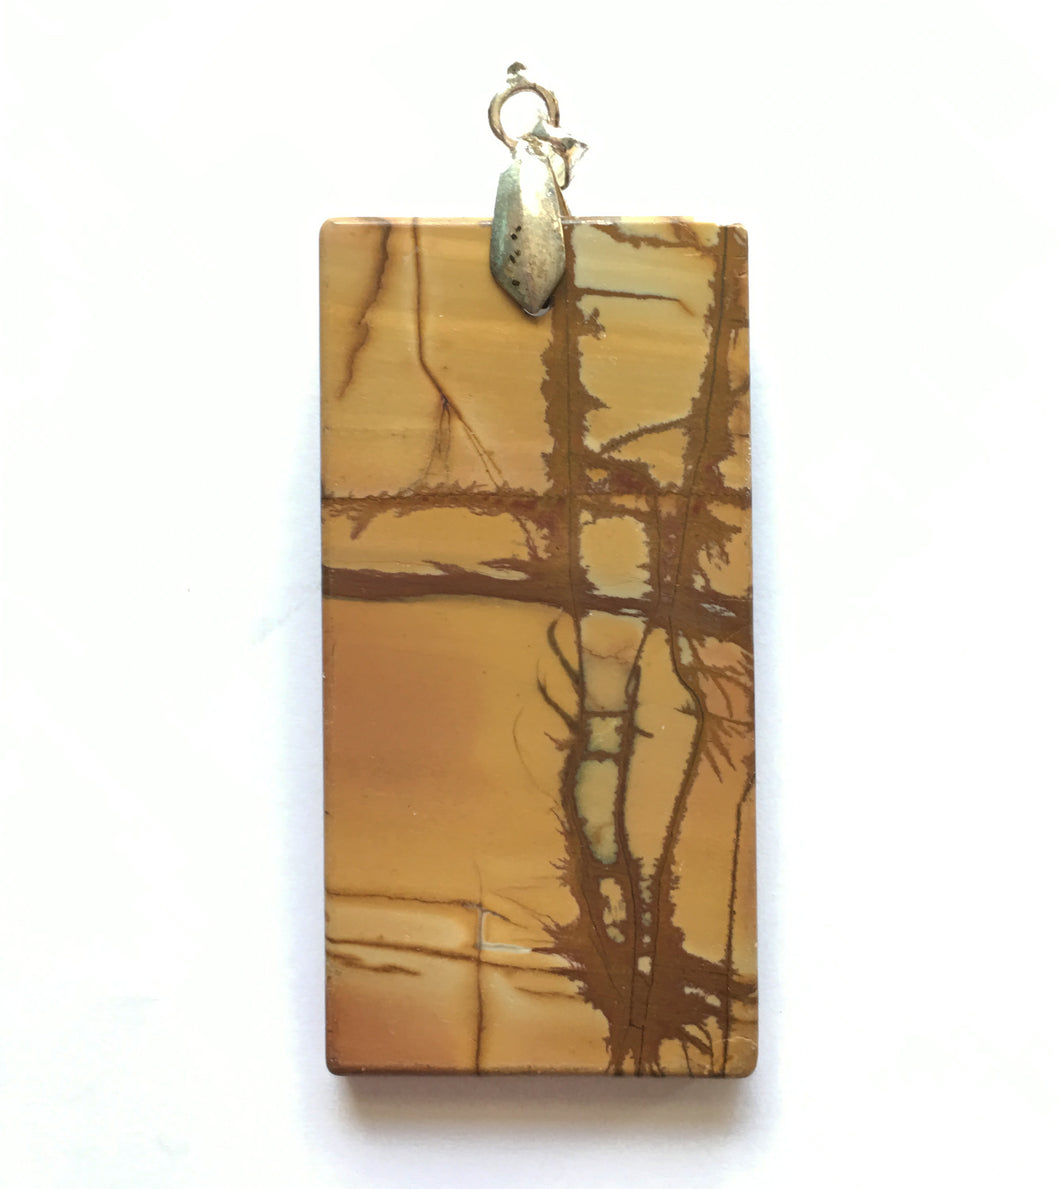 Picasso Stone Pendant  in Autumn hues in rectangular tile shape